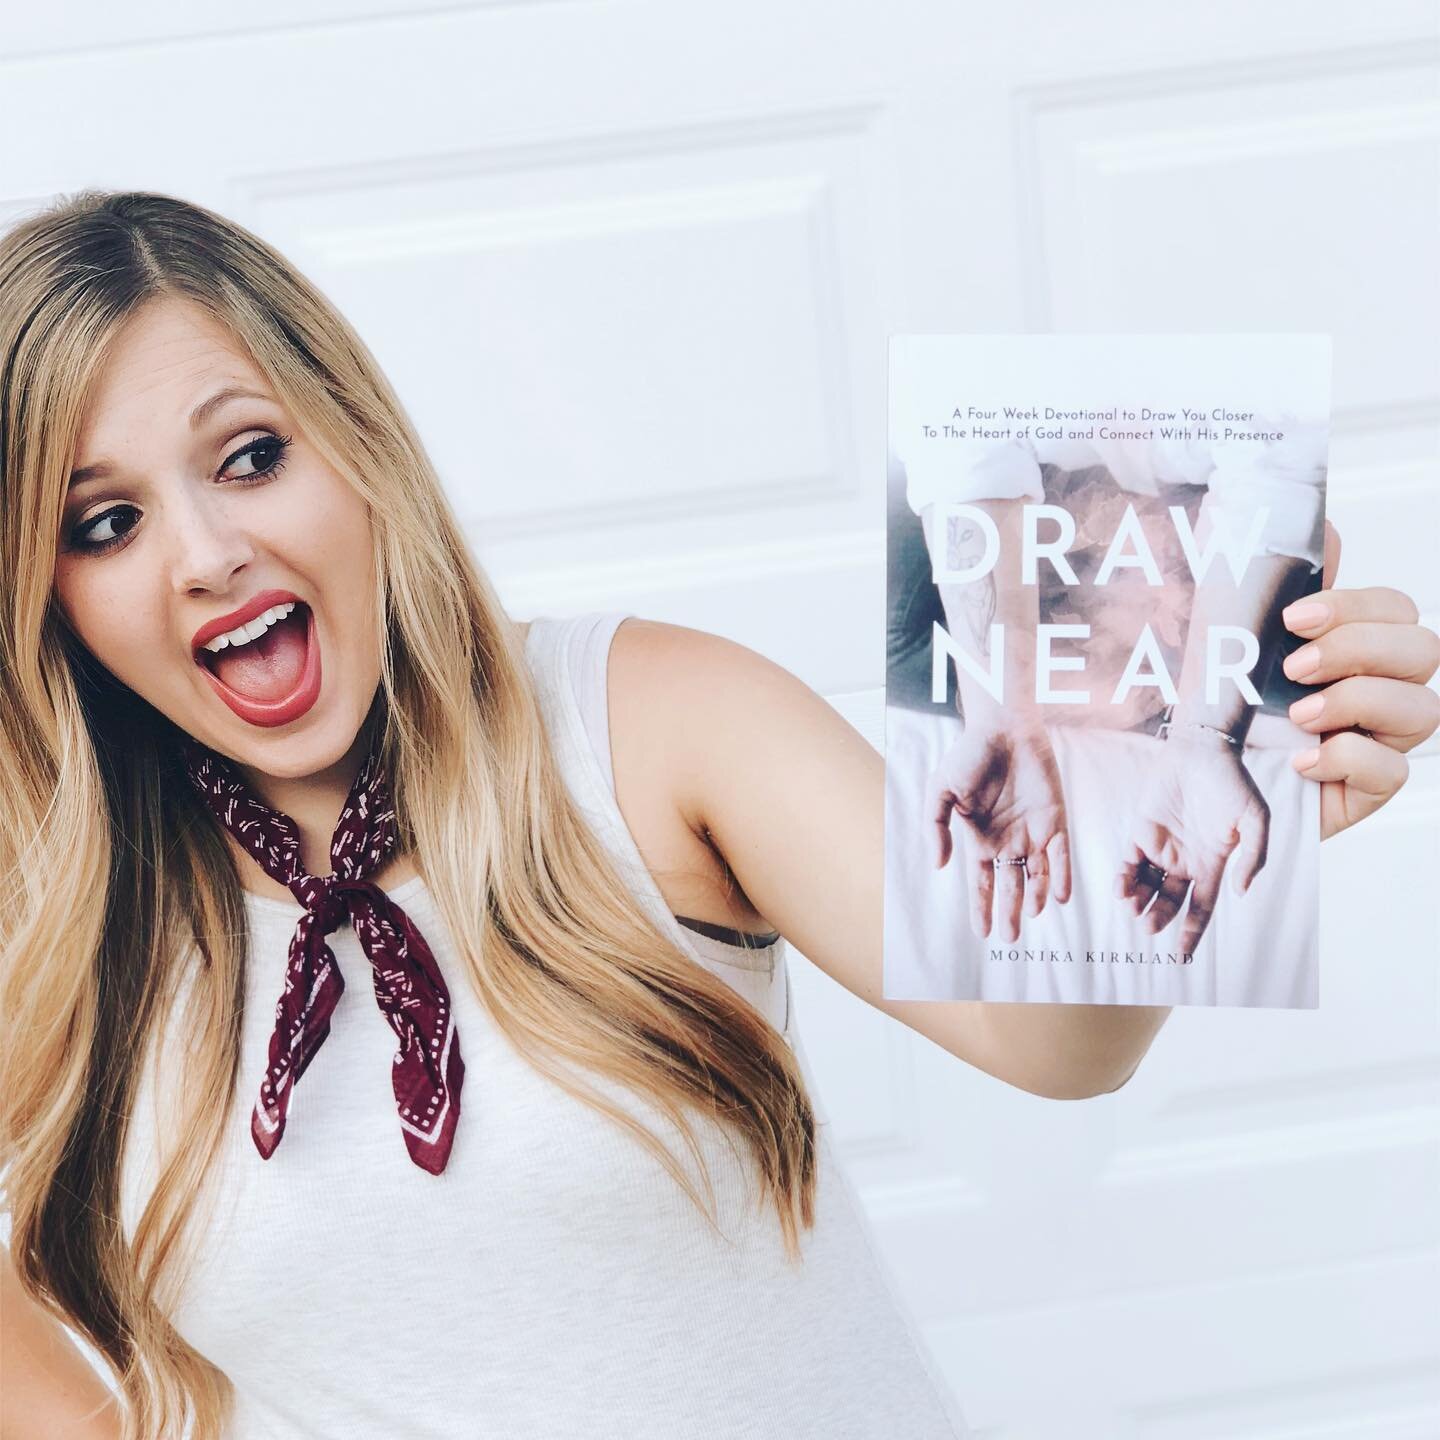 GUESS WHAT?!! I have an exciting announcement &amp; giveaway!!

Now for the first time EV-ER I have DRAW NEAR [[my four-week devotional to draw you closer to the heart of God and connect with His presence]] available as a FREE downloadable PDF. Yep, 